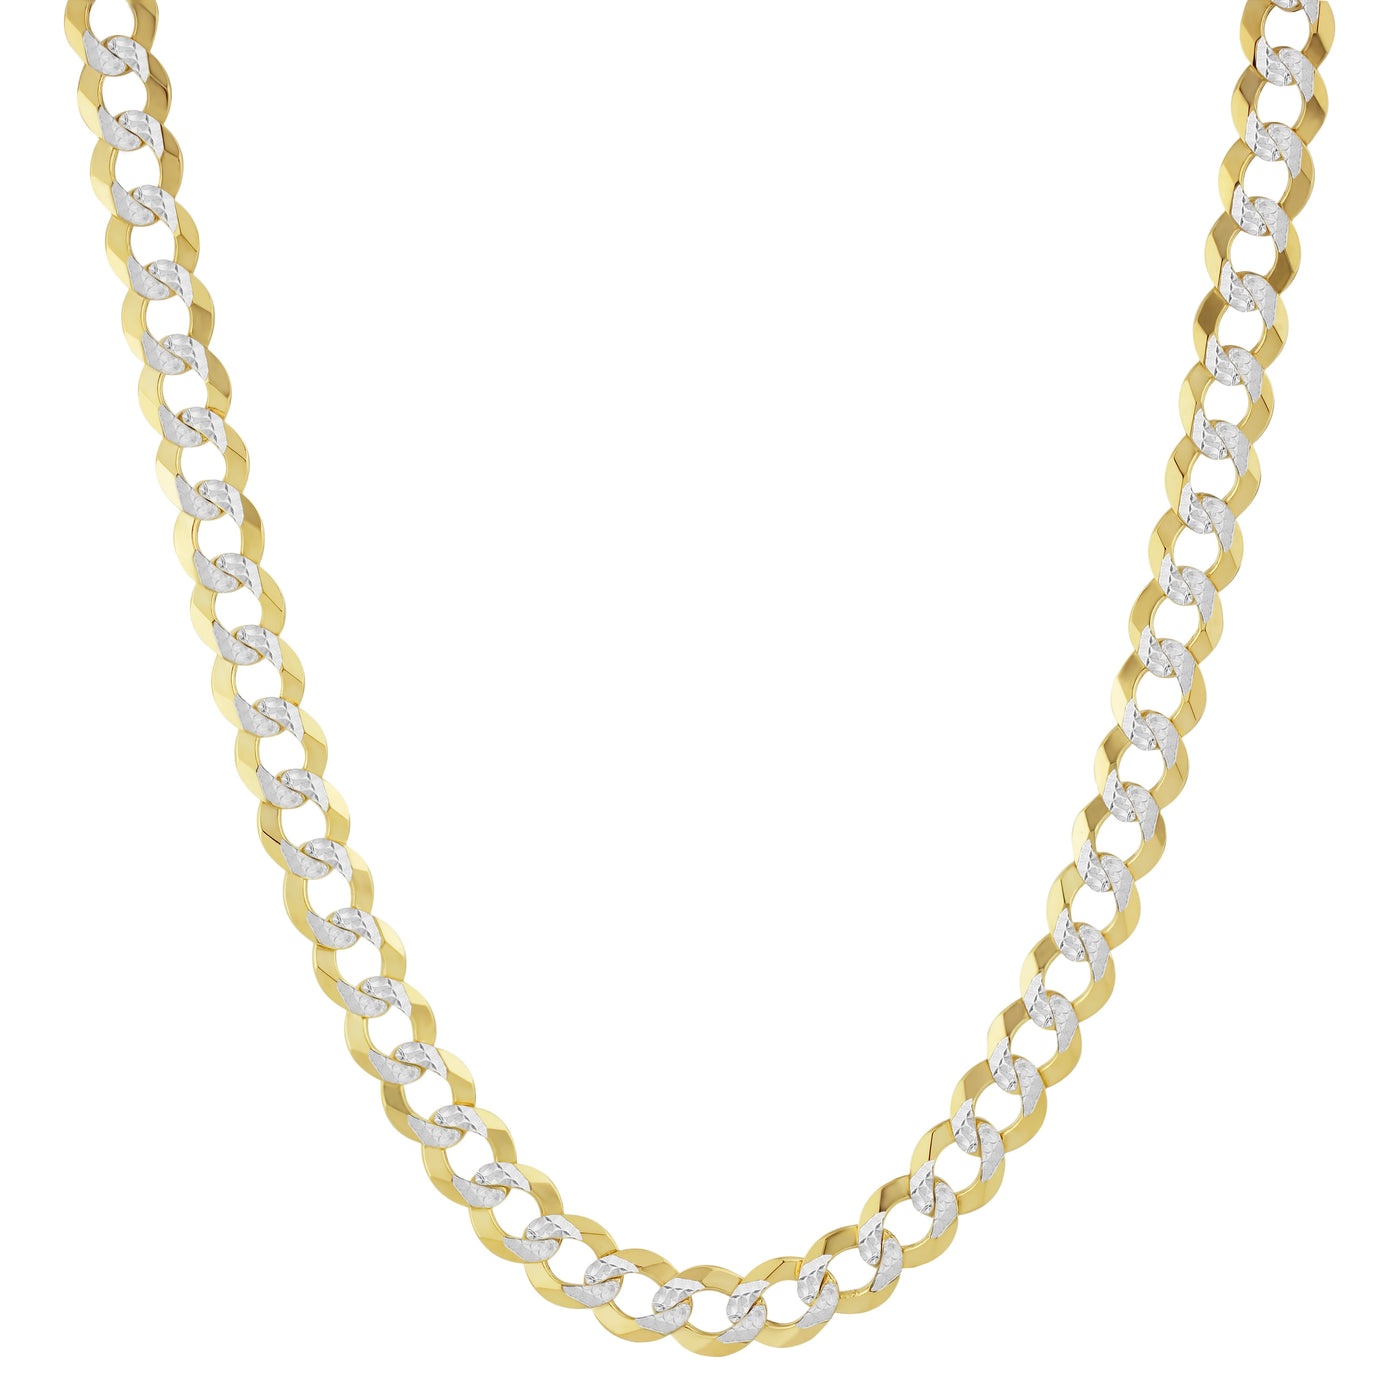 Pave Miami Curb Link Chain Necklace 10K Yellow White Gold - Solid